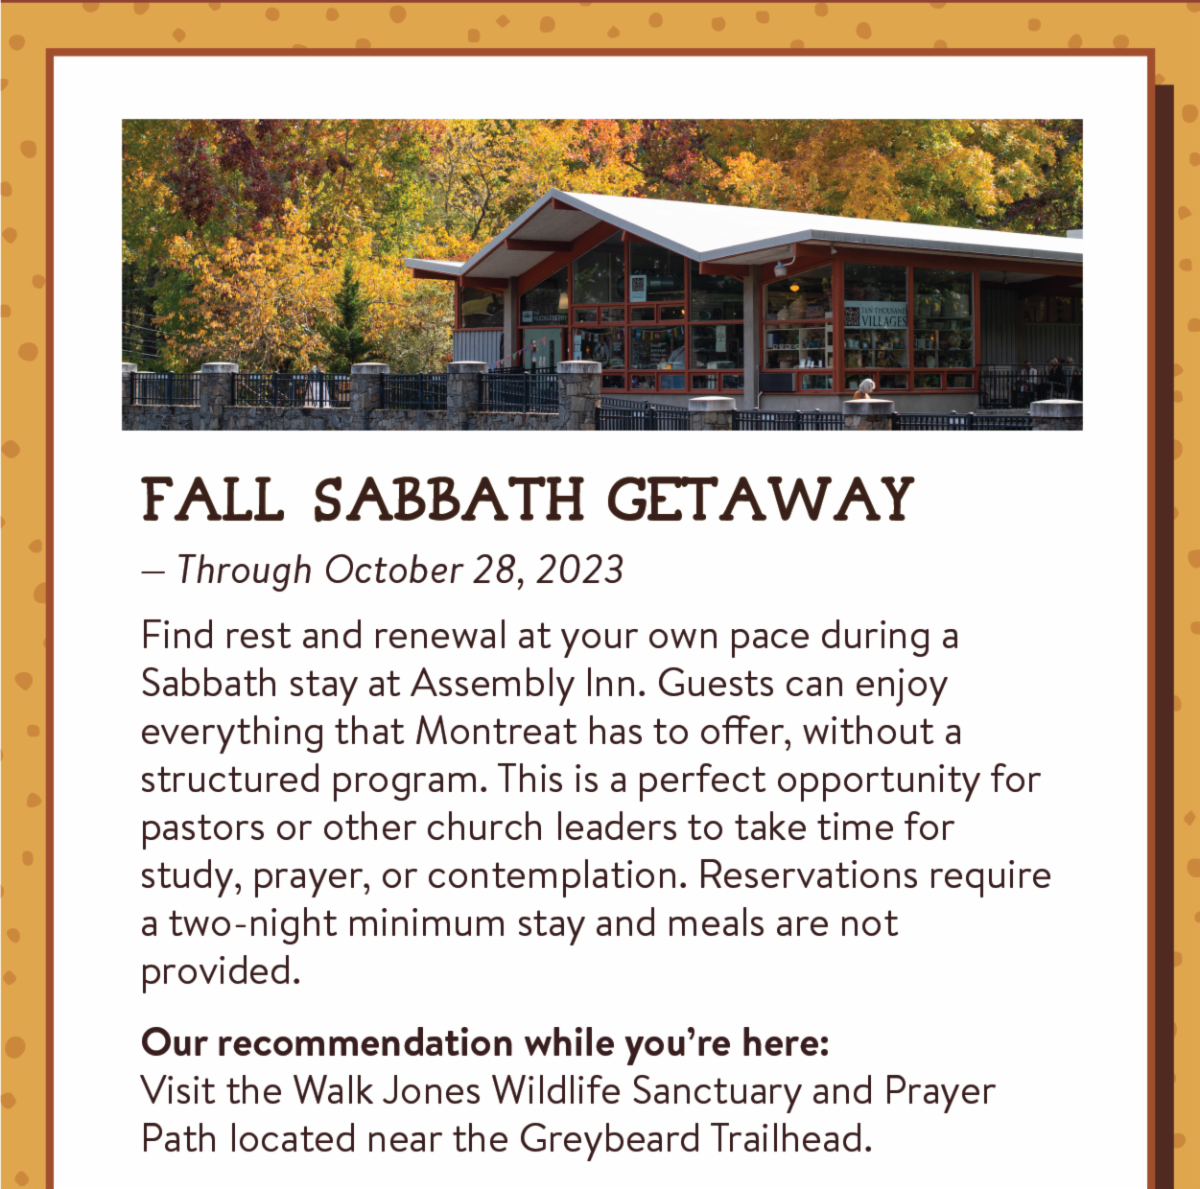 Fall Sabbath Getaway - Find rest and renewal at your own pace during a Sabbath stay at Assembly Inn. Guests can enjoy everything that Montreat has to offer, without a structured program. This is a perfect opportunity for pastors or other church leaders to take time for study, prayer, or contemplation. Reservations require a two-night minimum stay and meals are not provided. Our recommendation while you’re here:Visit the Walk Jones Wildlife Sanctuary and Prayer Path located near the Greybeard Trailhead.